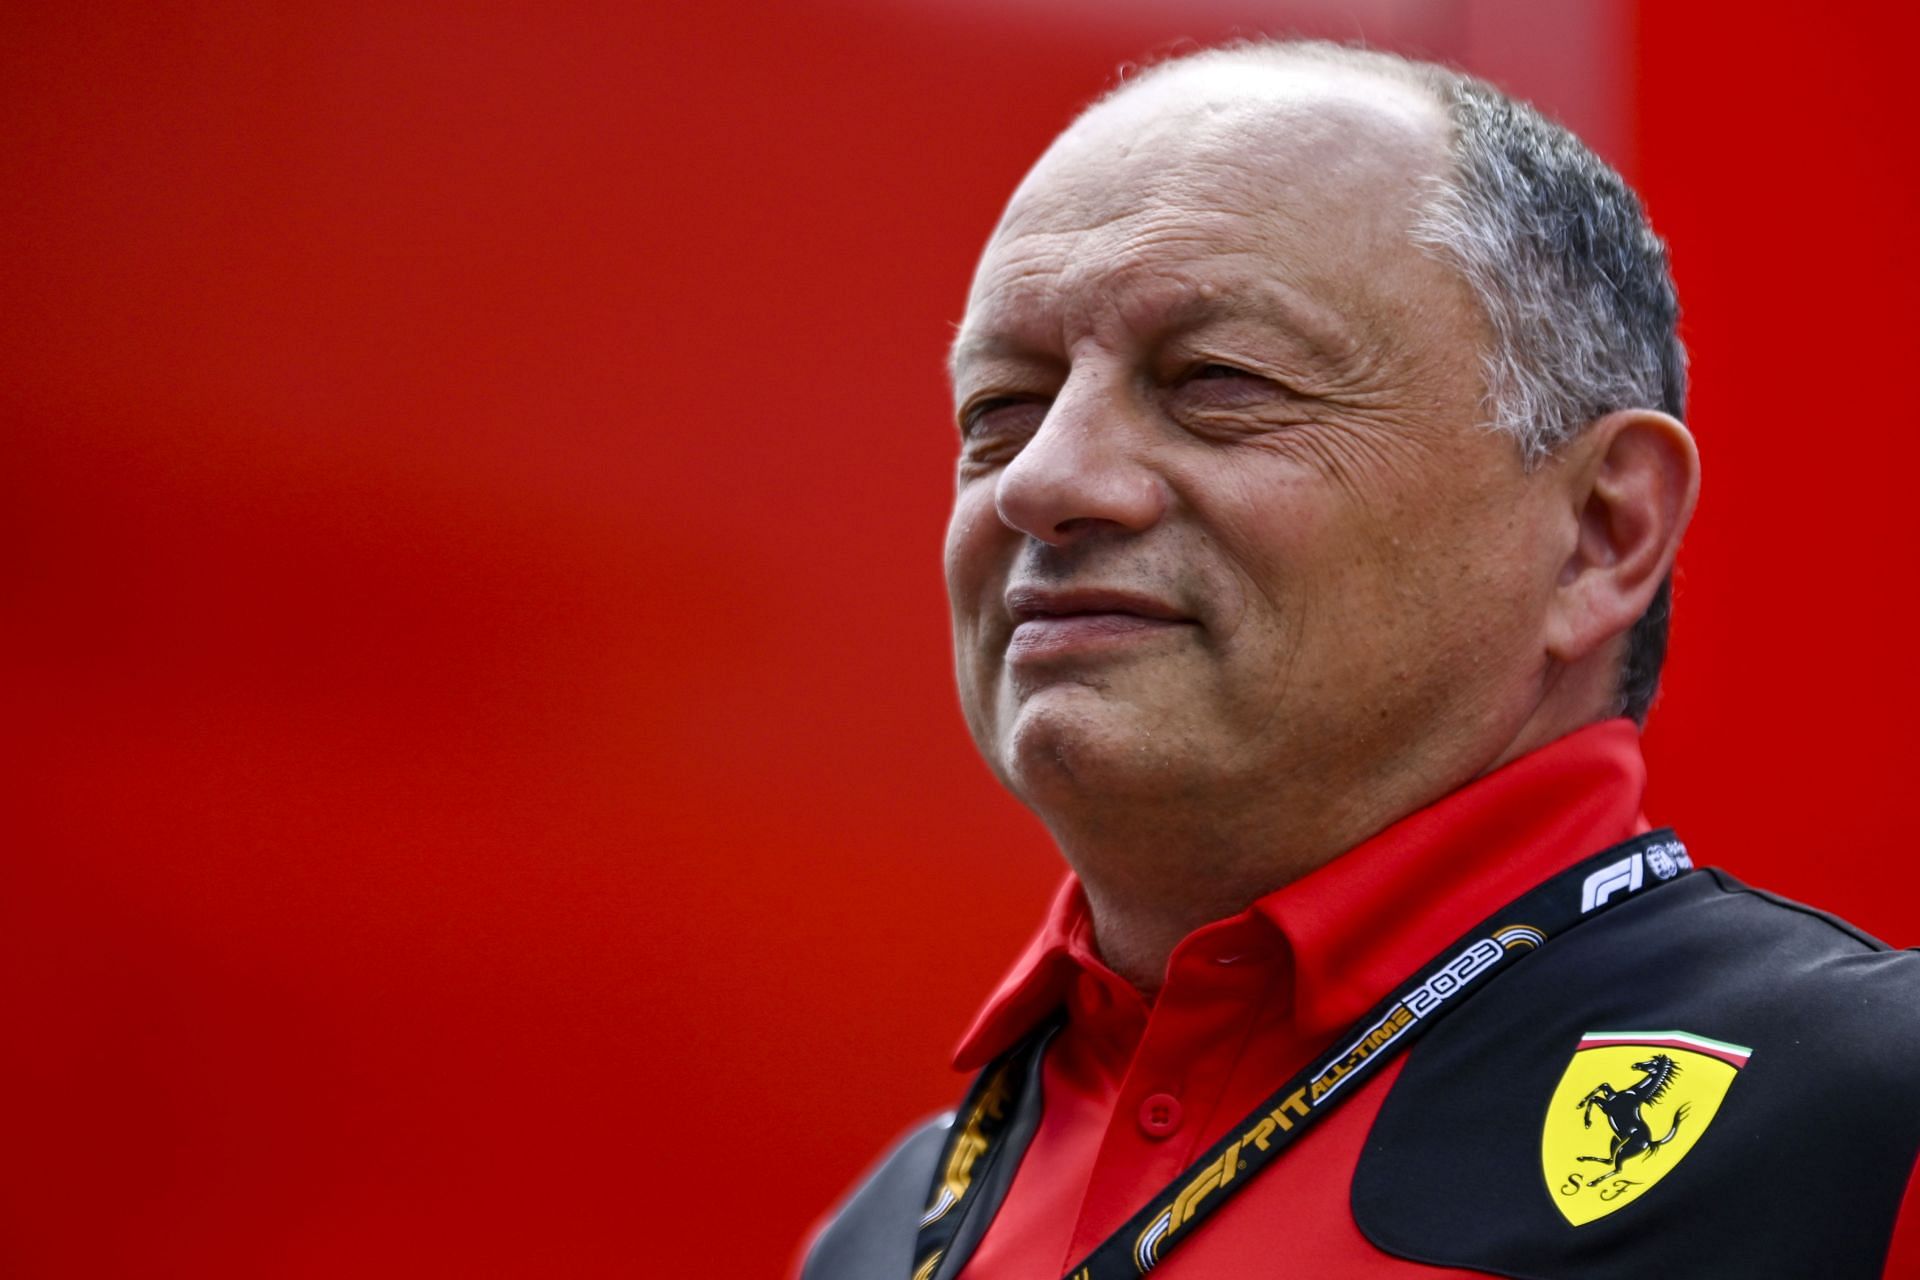 Ferrari team principal talks about what could 'the main part of